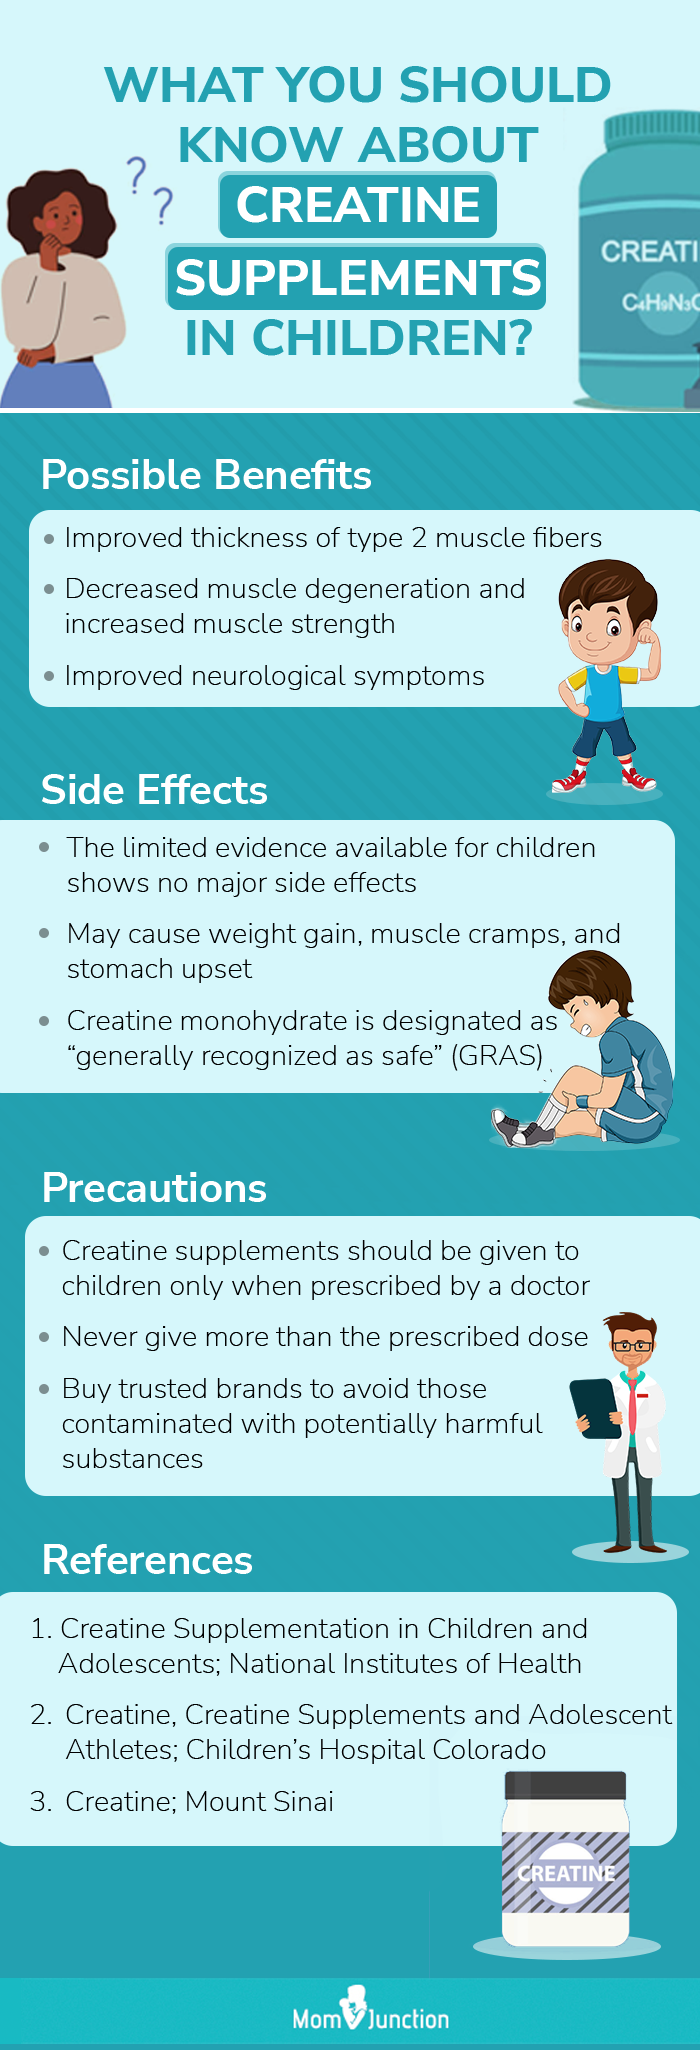 more about creatine supplements for kids (infographic)